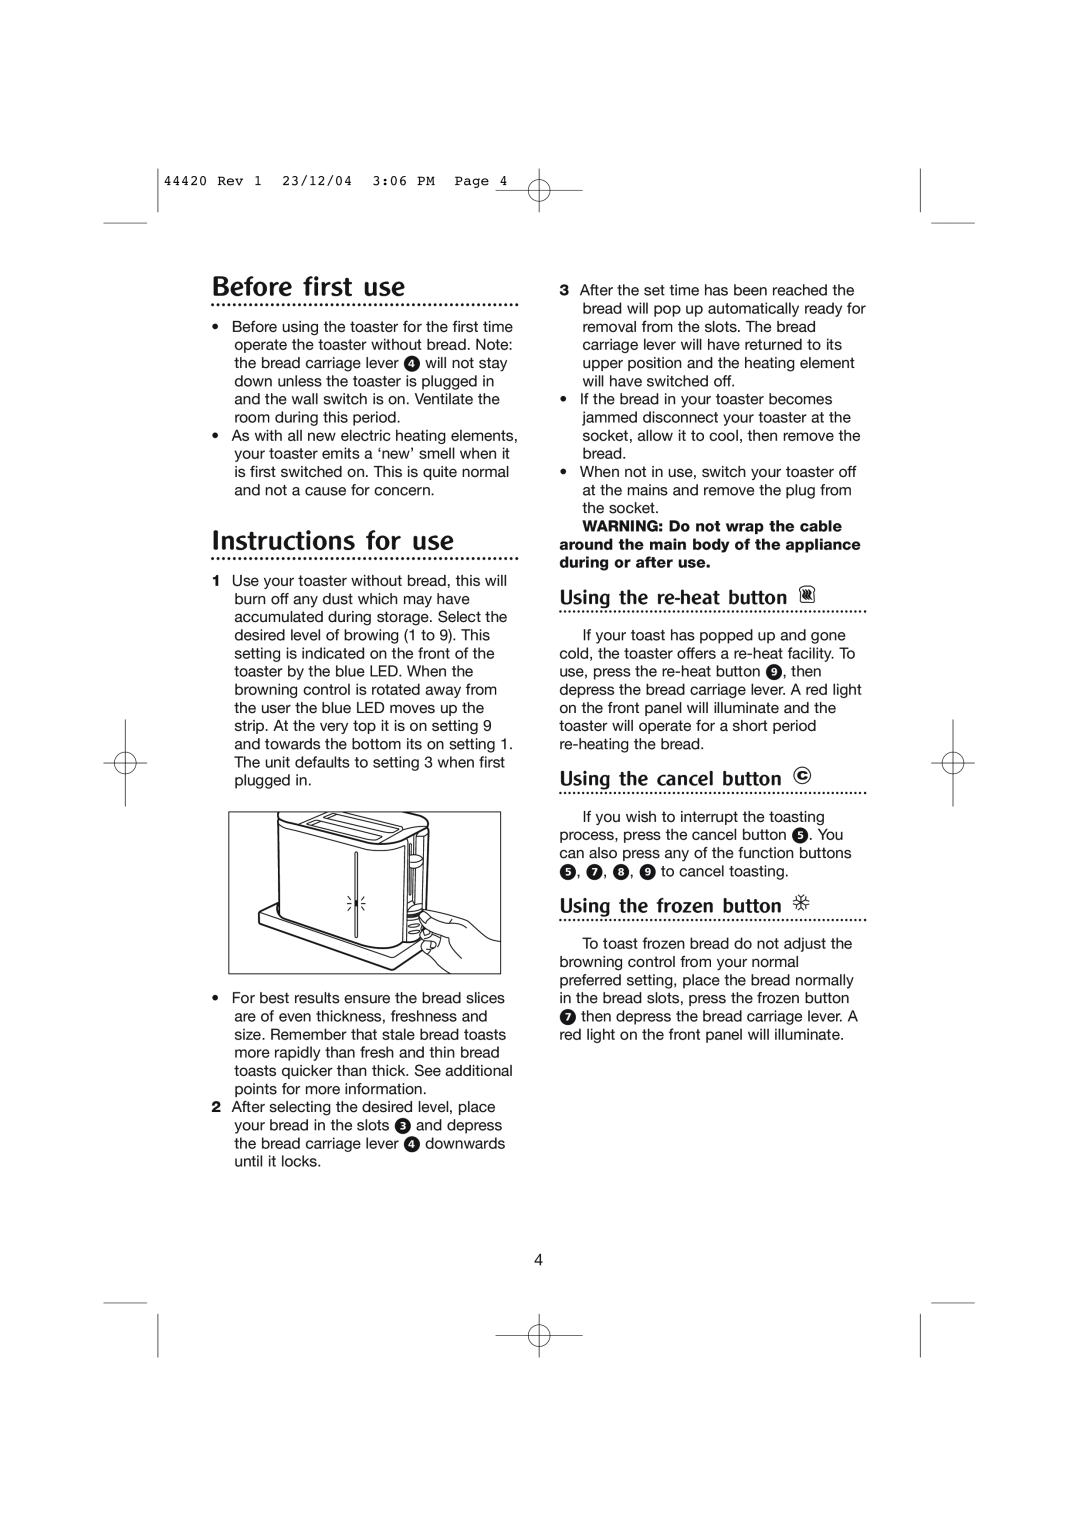 Morphy Richards 2 slice manhattan toaster manual Before first use, Instructions for use, Using the re-heat button 